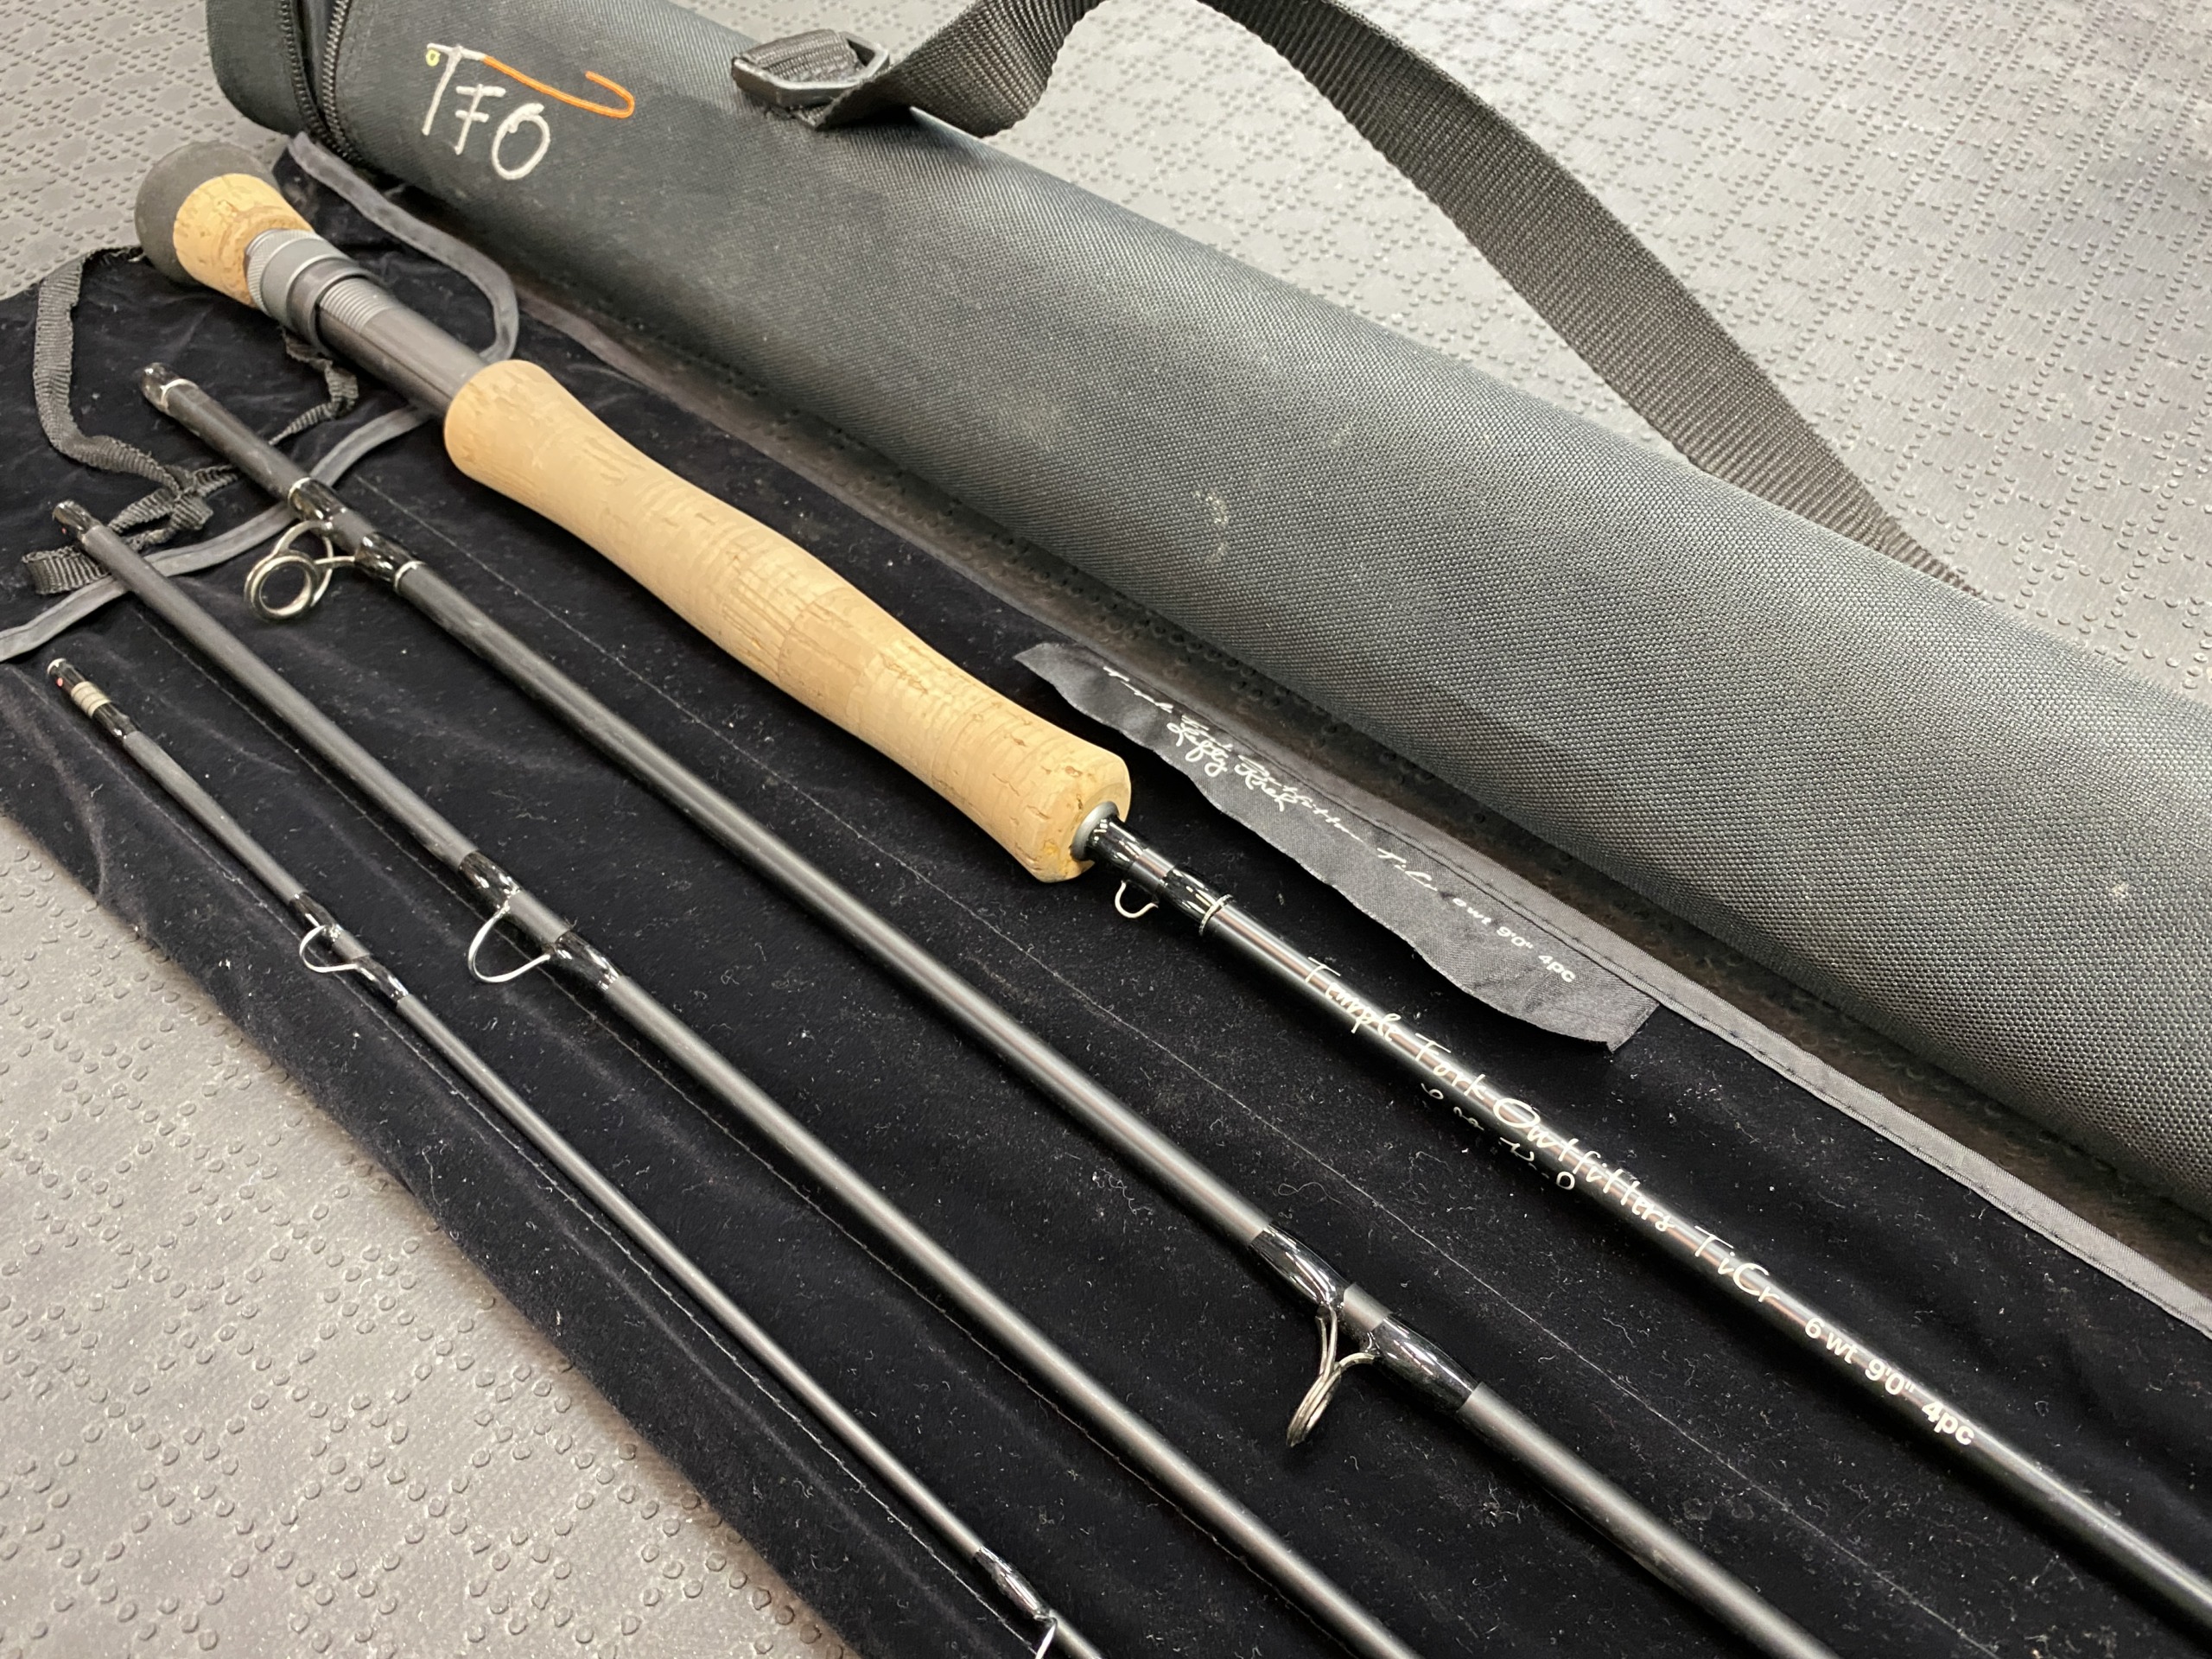 https://thefirstcast.ca/wp-content/uploads/2022/07/TFO-Temple-Fork-Outfitters-Lefty-Kreh-TiCr-9Foot-6Weight-4Piece-Fly-Rod-B-scaled.jpg